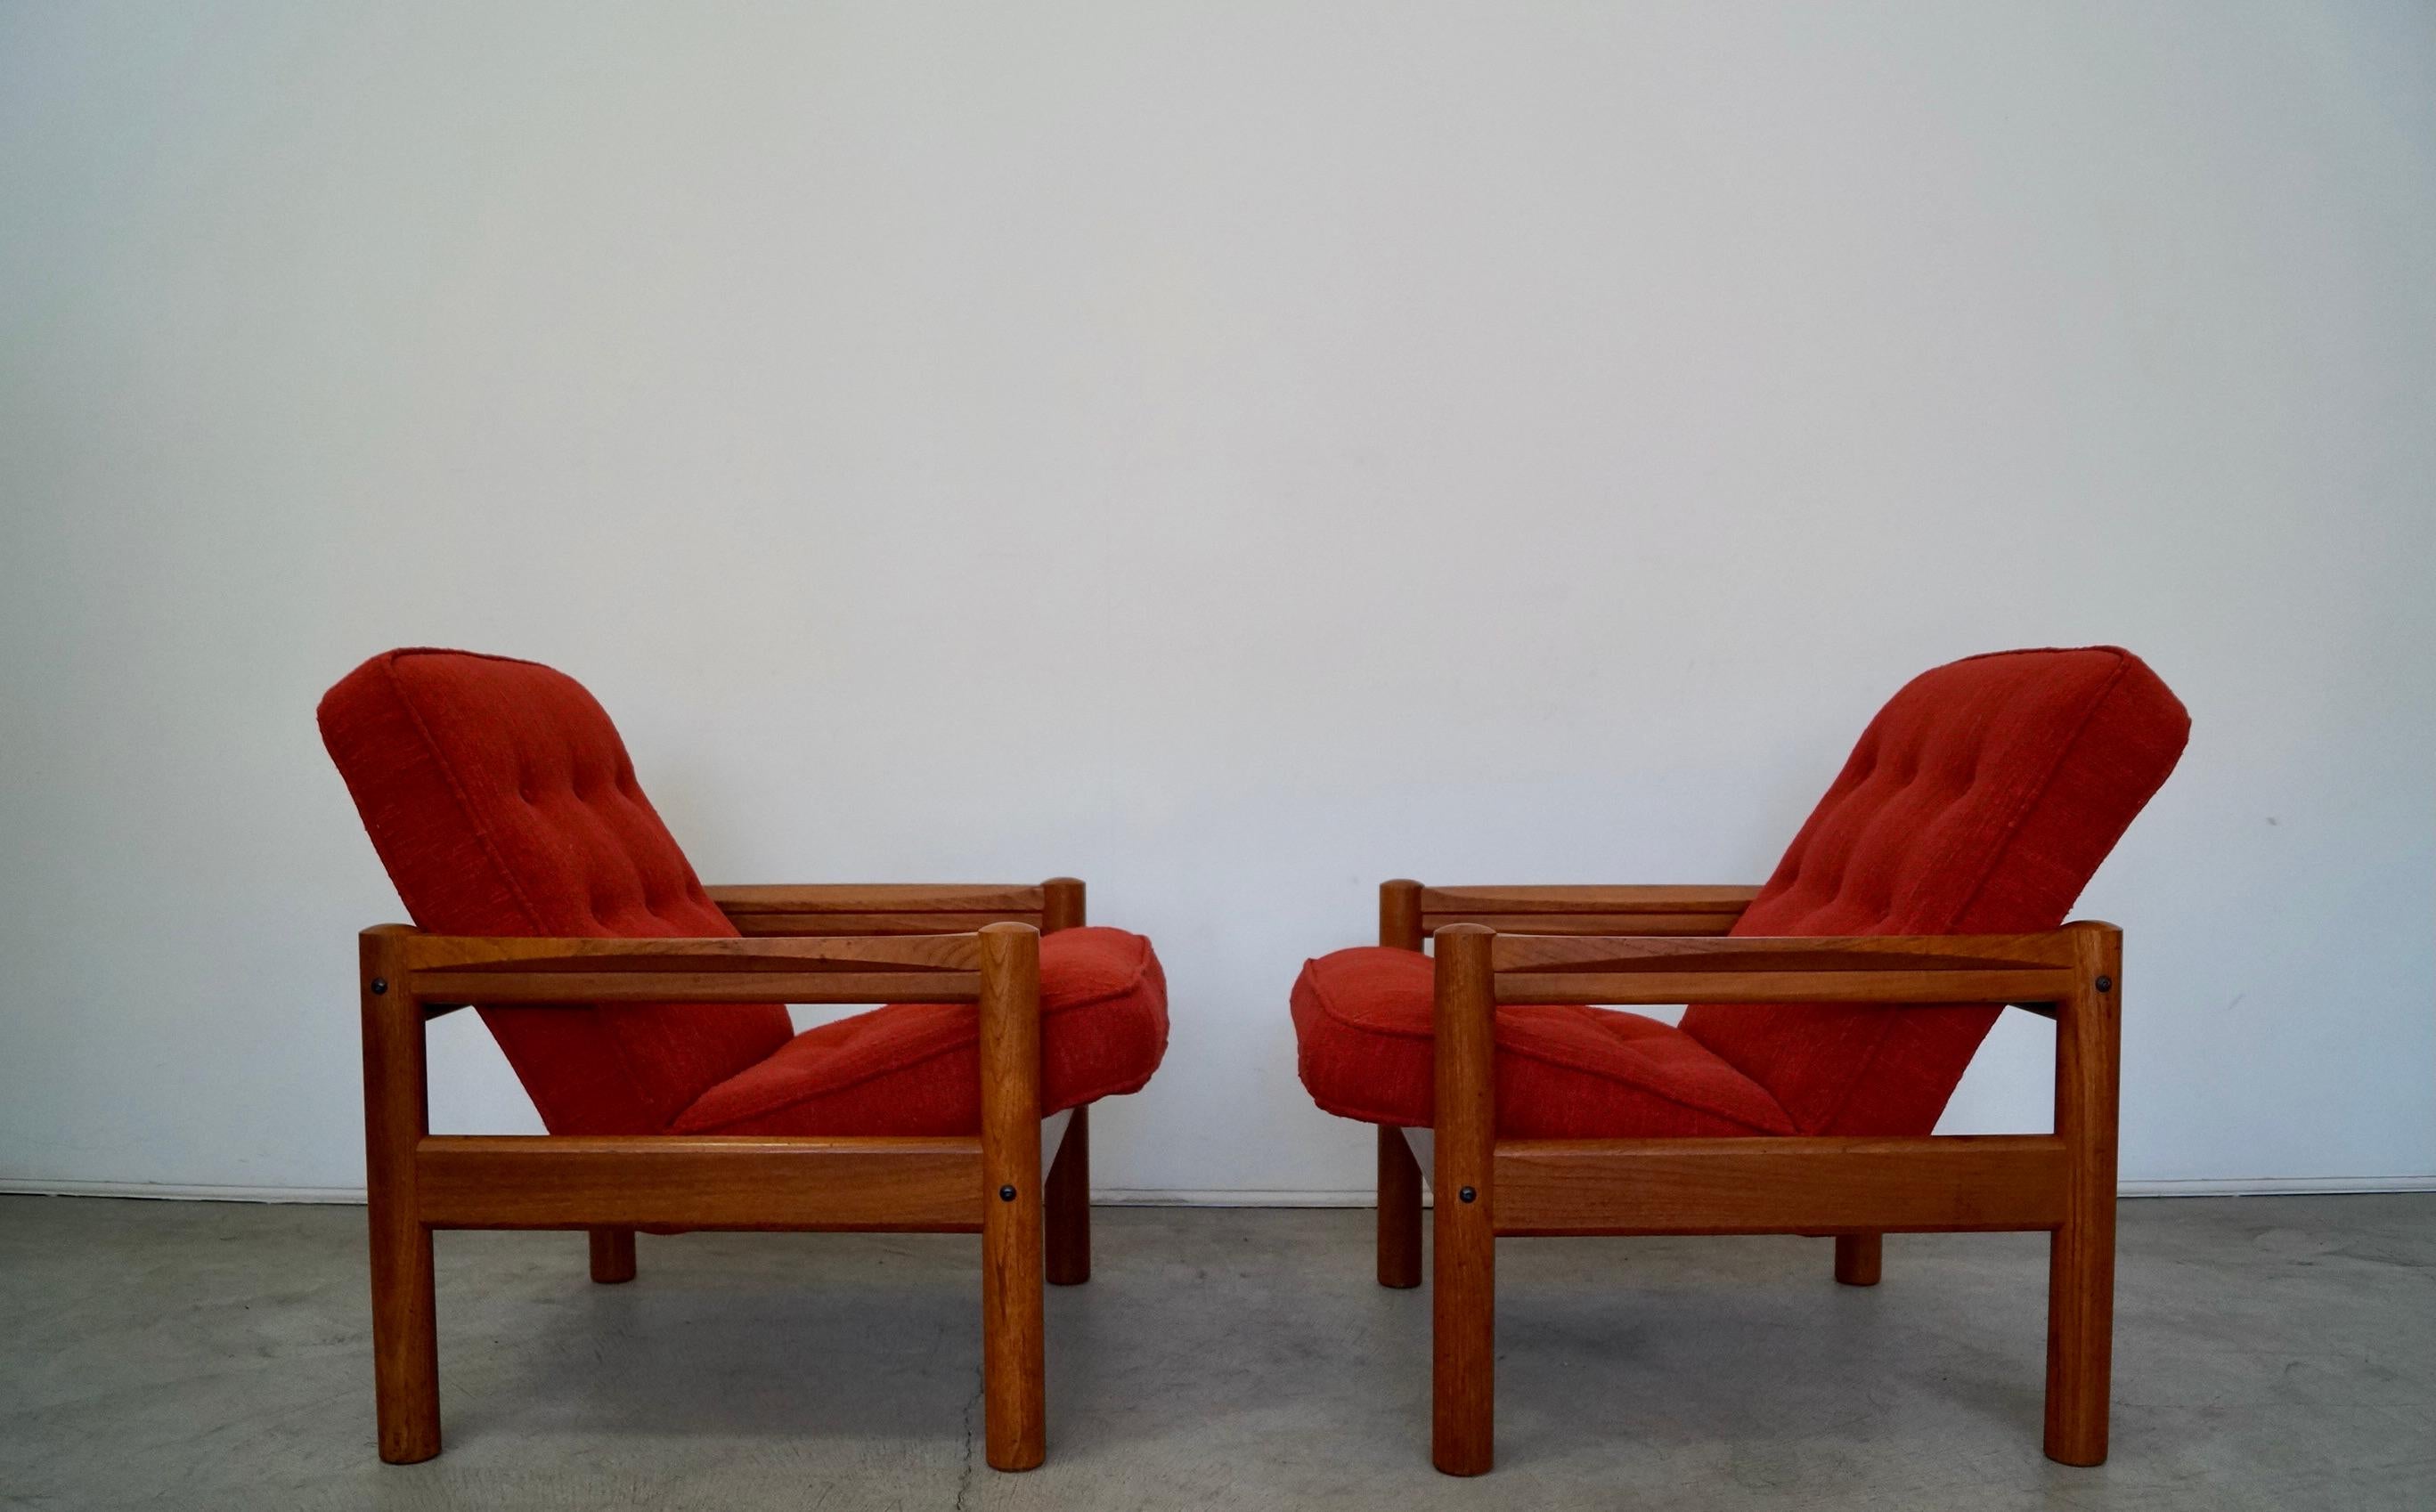 1970's Danish Modern Teak Lounge Chairs by Domino Mobler - a Pair For Sale 4